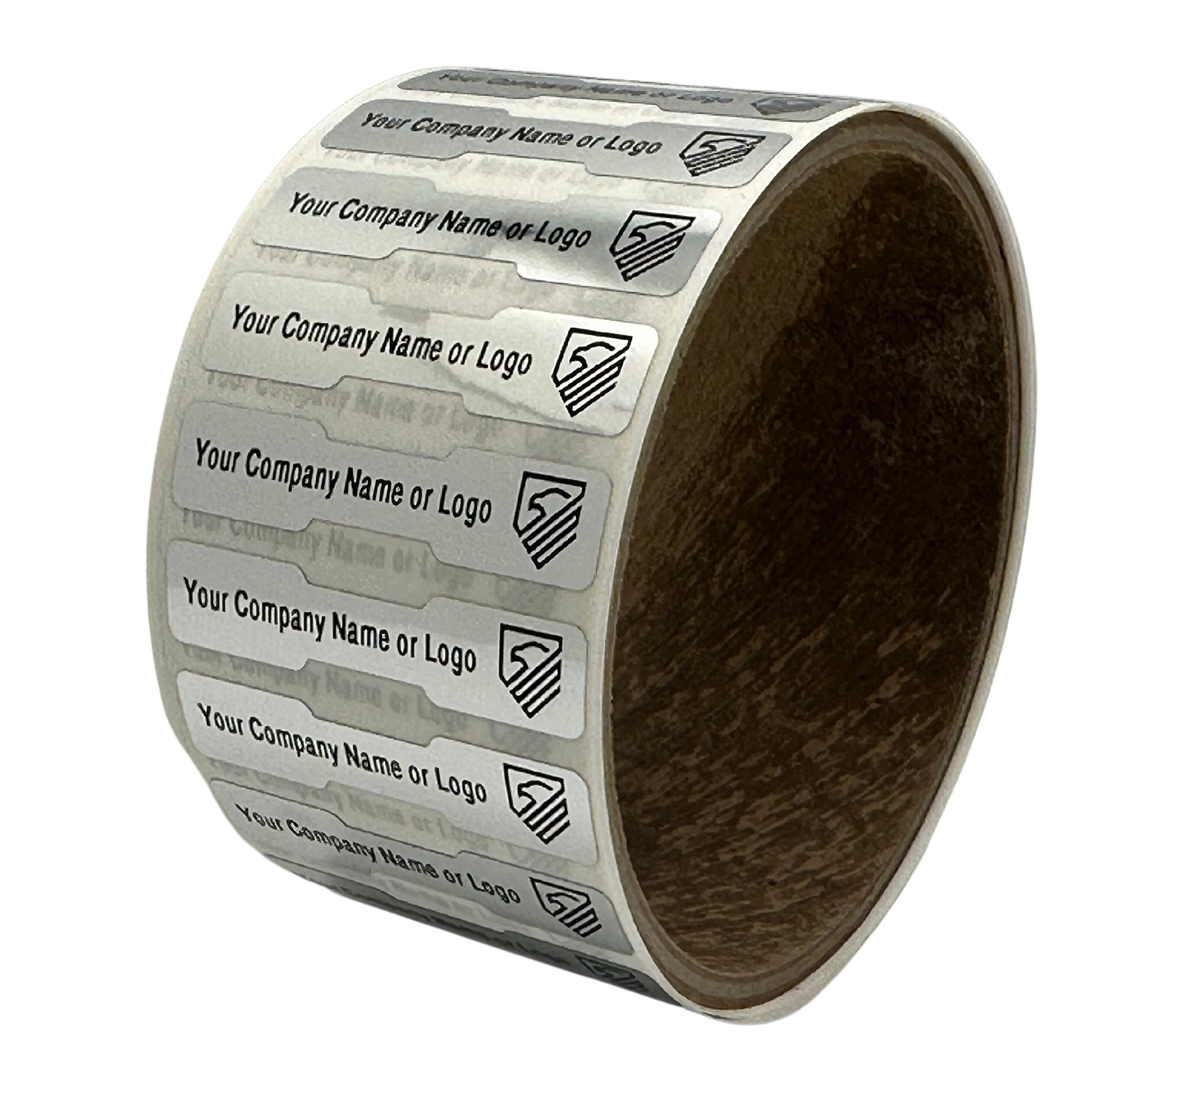 250 Tamper Evident Security Labels Silver Chrome TamperVoidPro Seal Sticker, Dogbone Shape Size 1.75" x 0.375 (44mm x 9mm). Custom Printed. >Click on item details to customize.